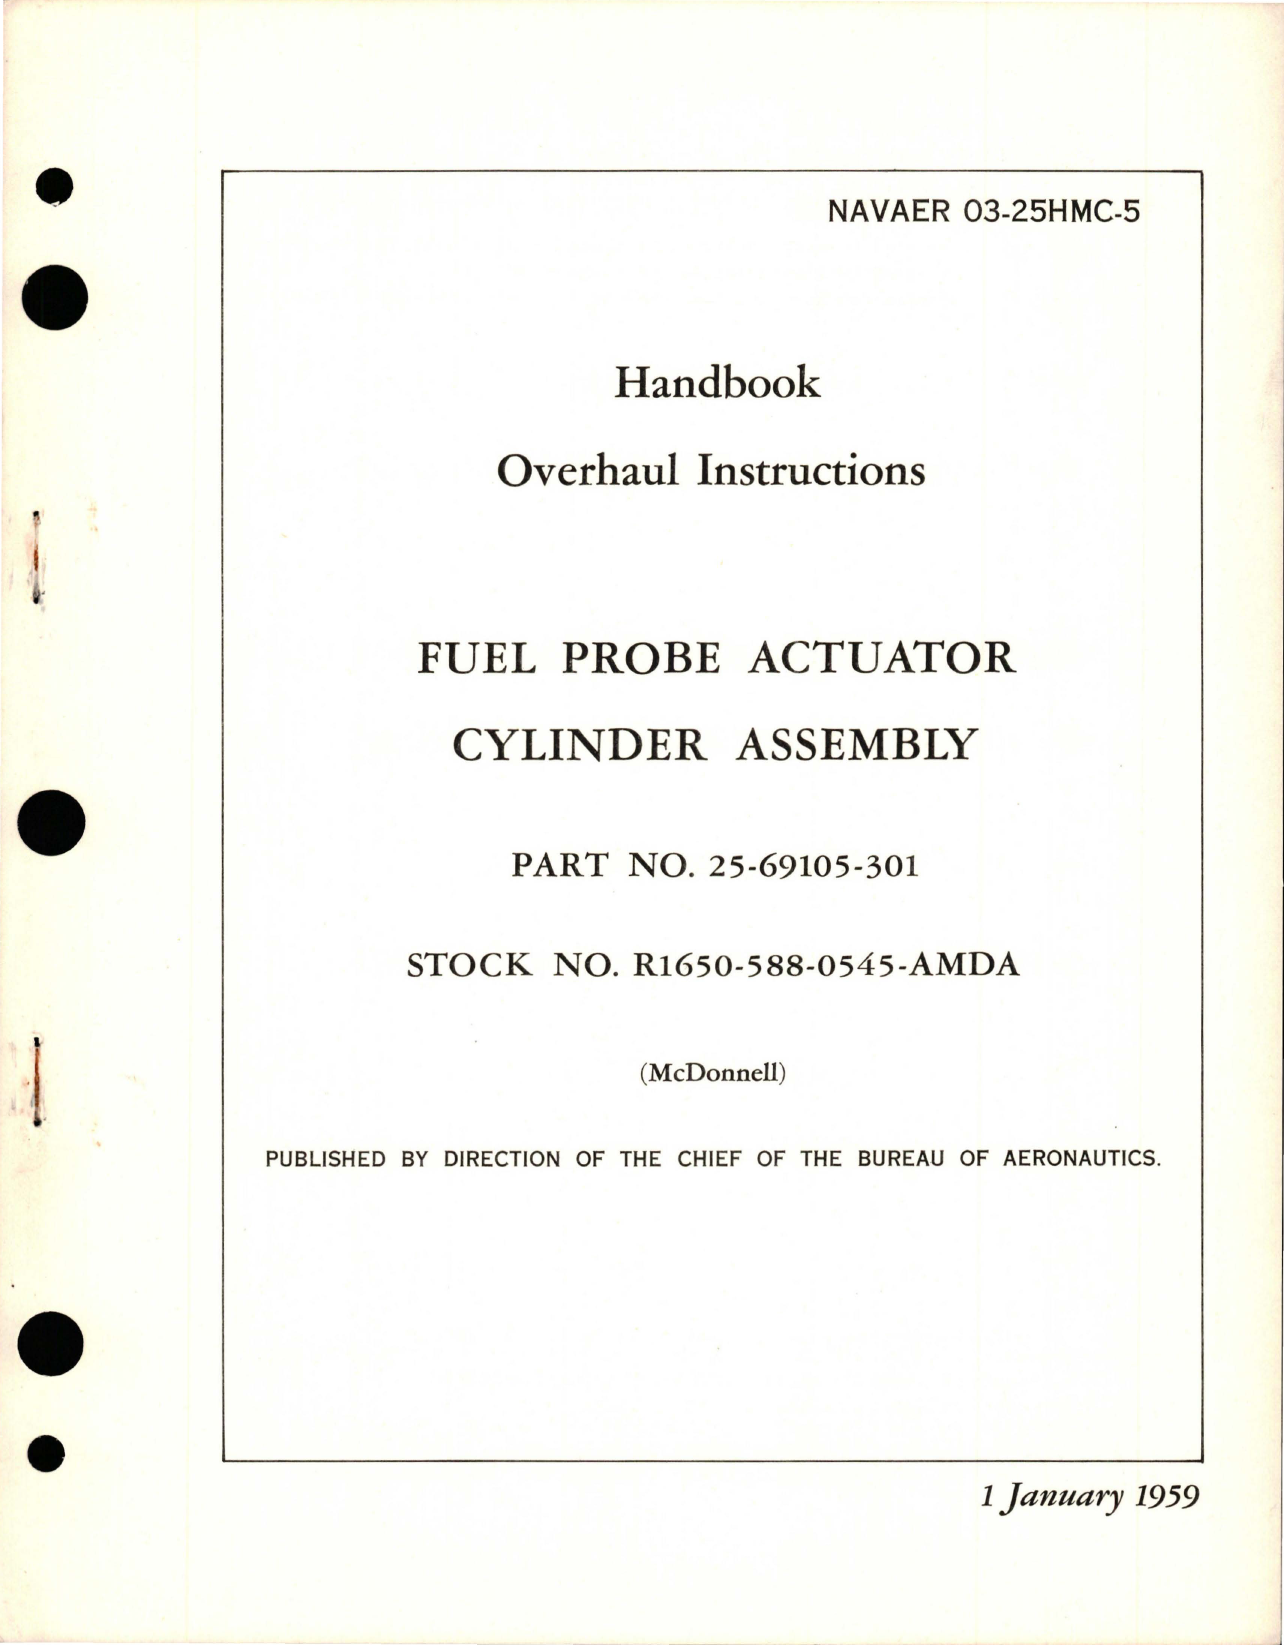 Sample page 1 from AirCorps Library document: Overhaul Instructions for Fuel Probe Actuator Cylinder Assembly - Part 25-69105-301